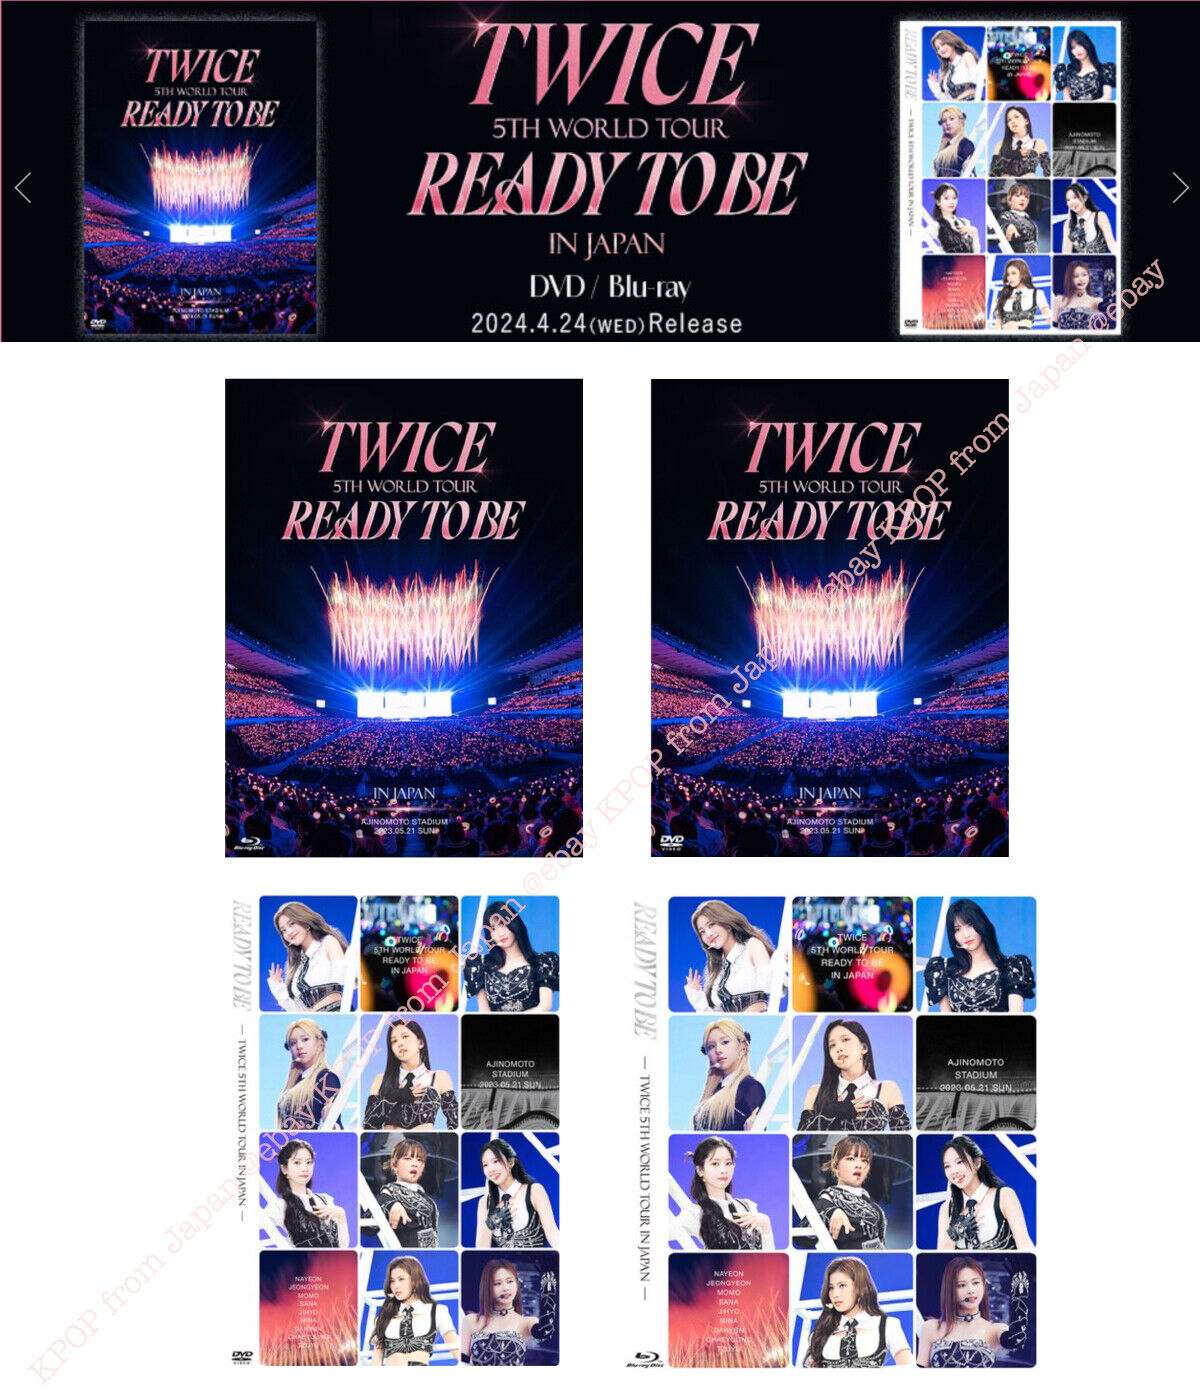 TWICE 5TH WORLD TOUR 'READY TO BE' in JAPAN[DVD] [初回限定盤] TWICE - ミュージック